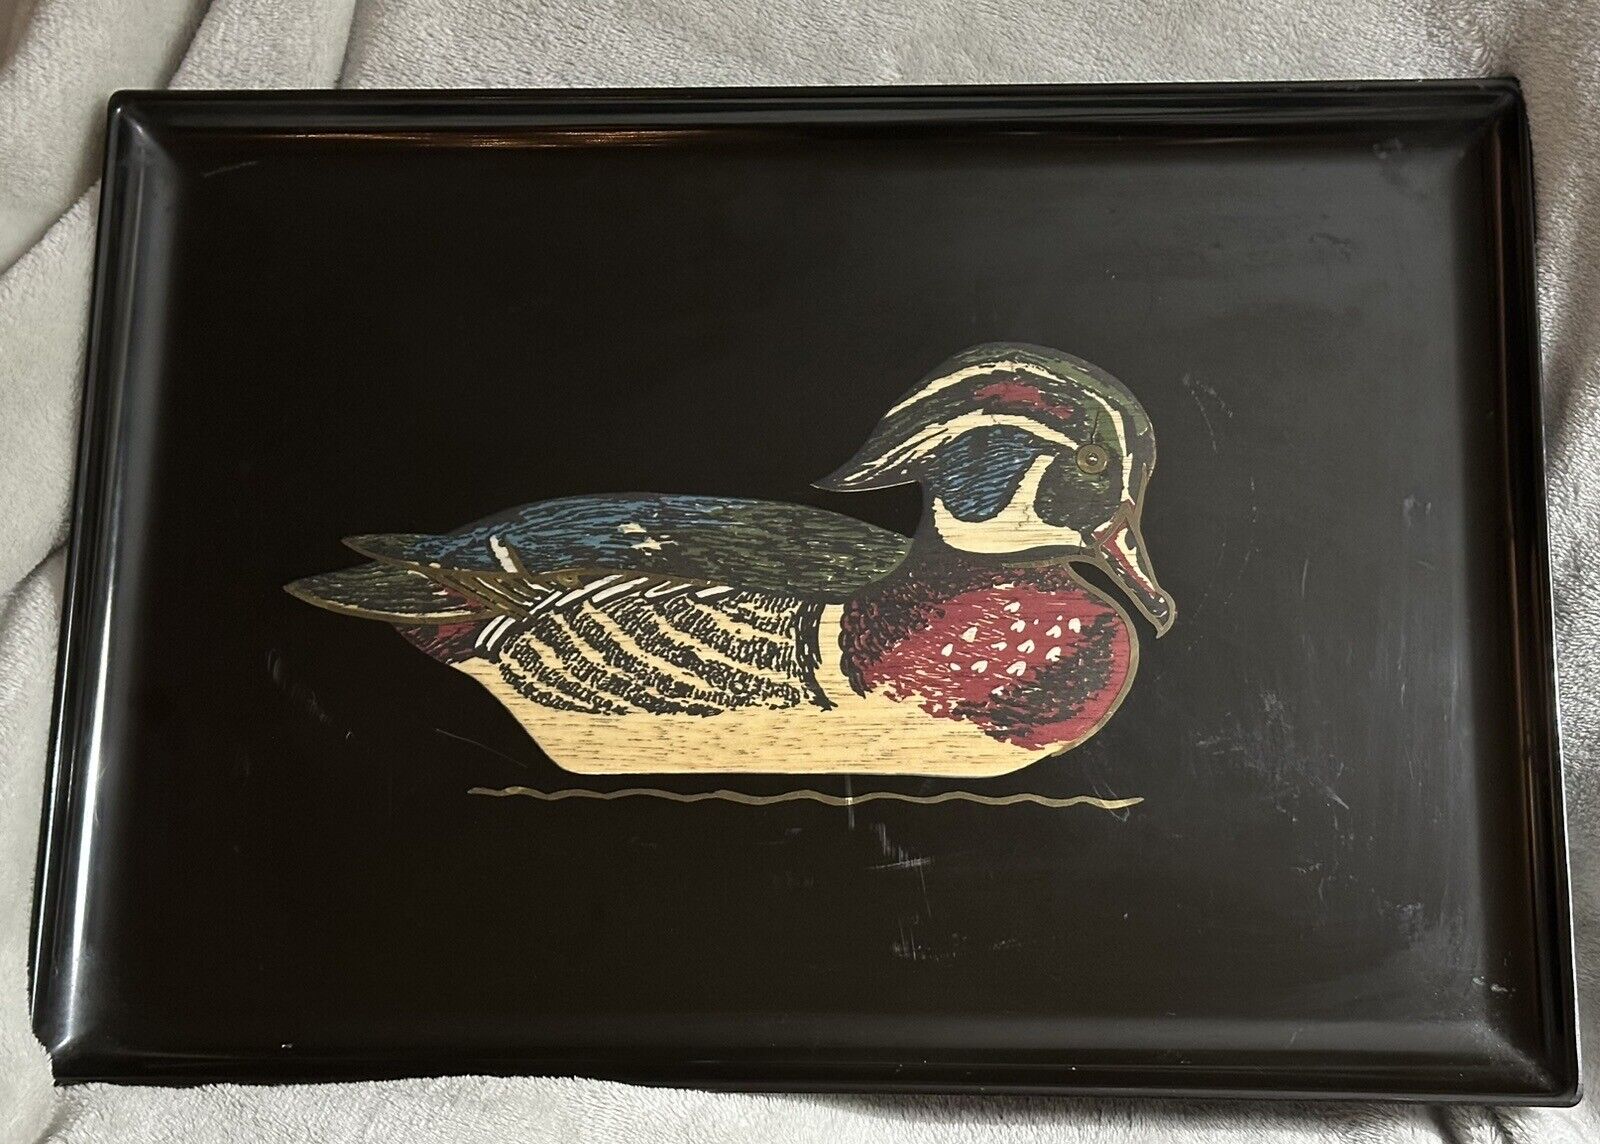 Courac Of Monterey Tray With Duck Design. Vintage, Made In Monterey CA.